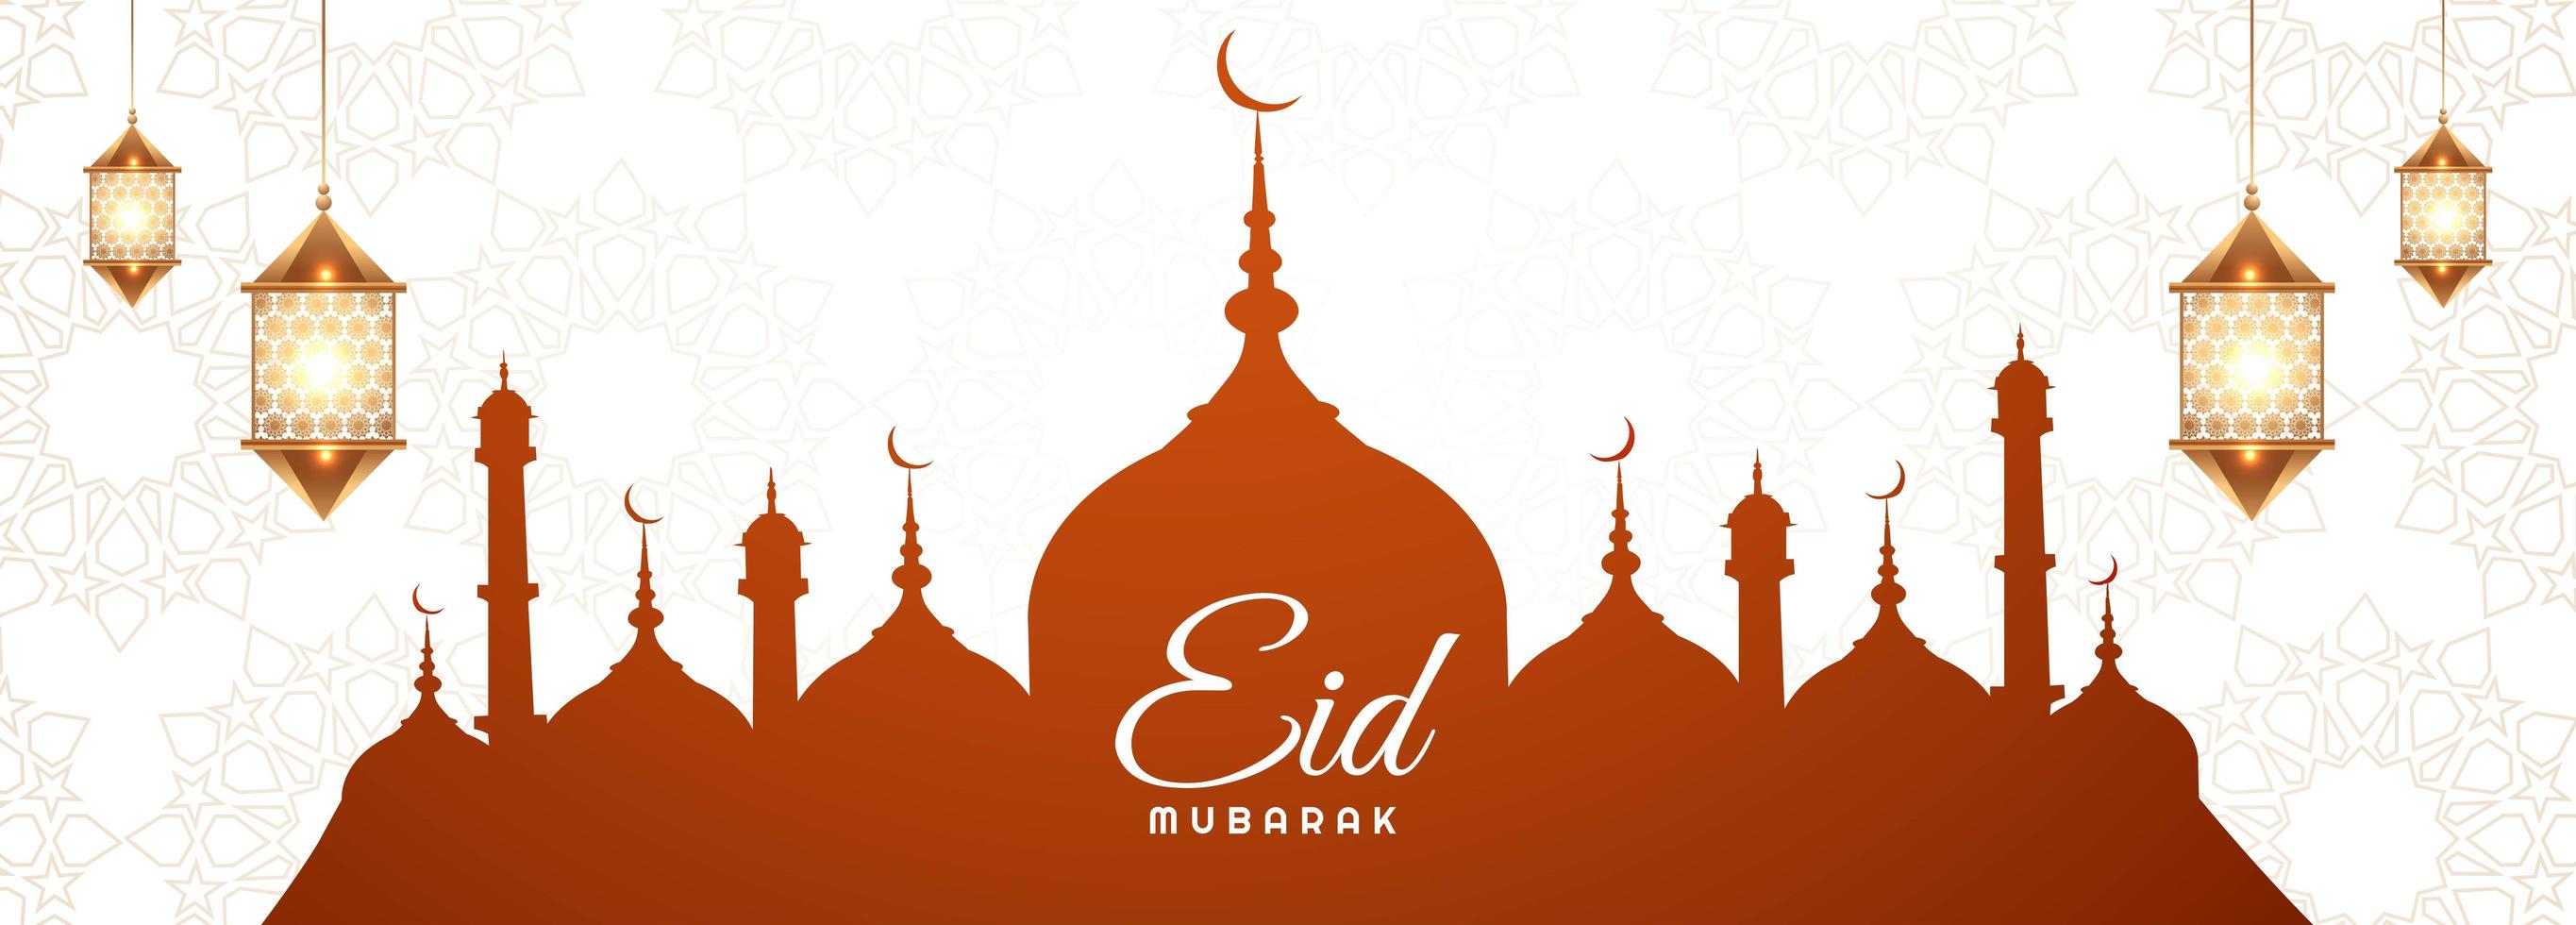 Elegant banner with mosque silhouette for eid mubarak card  vector